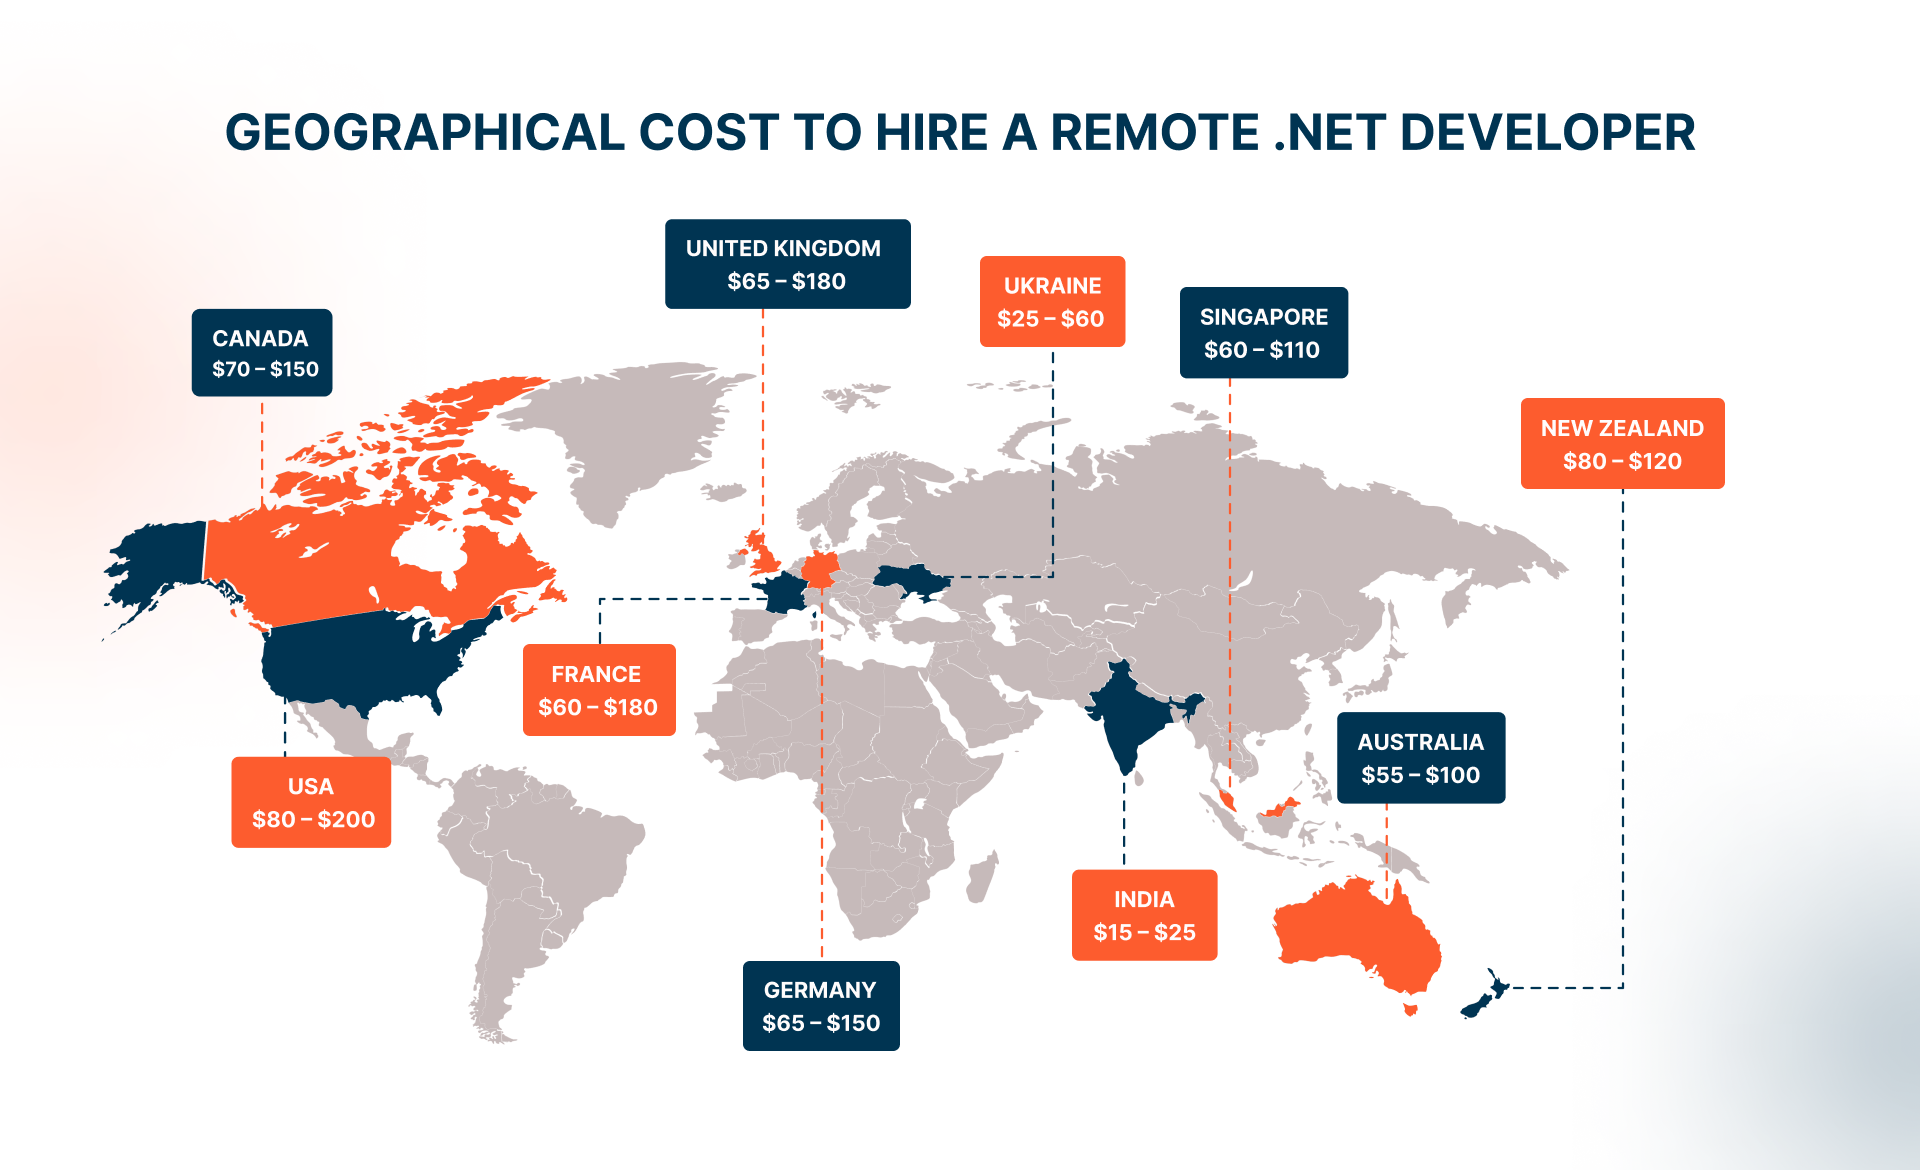 Vital factors driving the Cost to Hire Remote .Net Developers